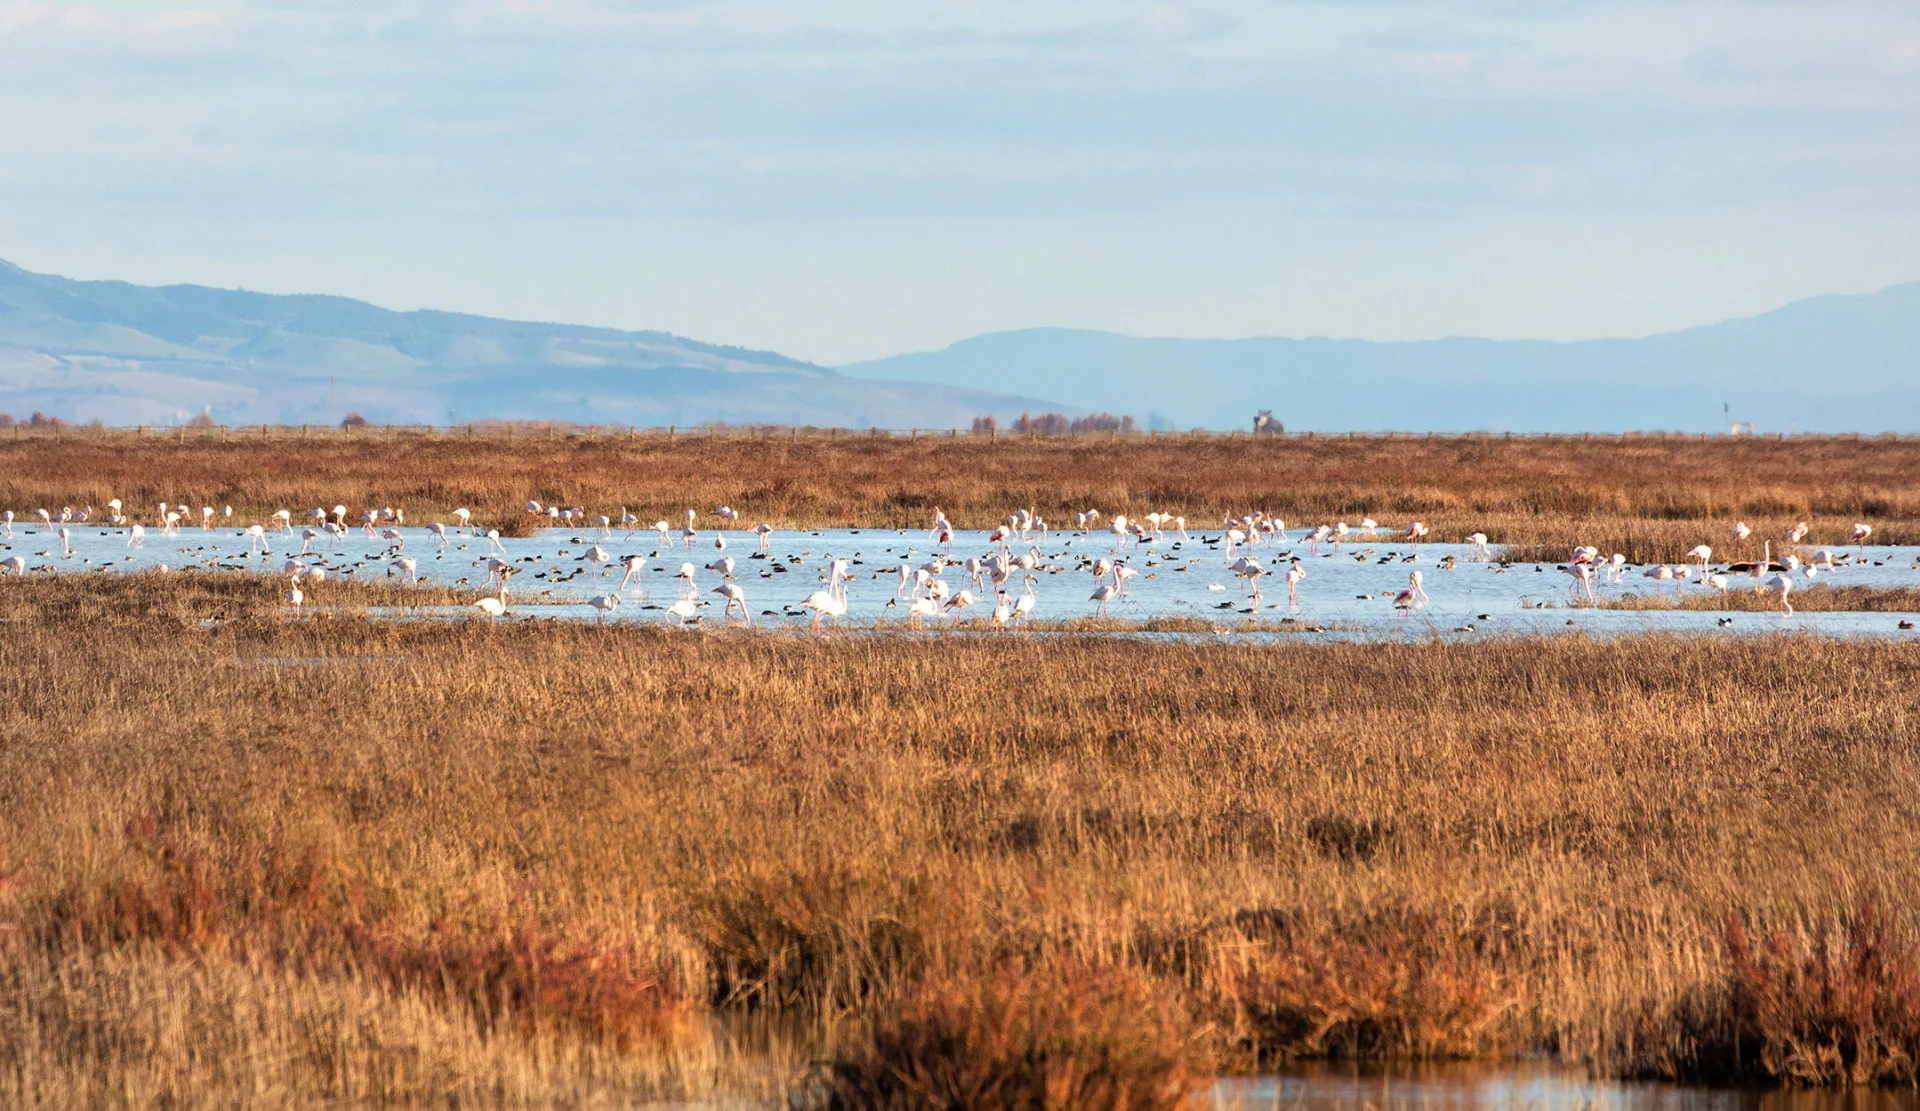 The Doñana National Park with flamingos in the distance